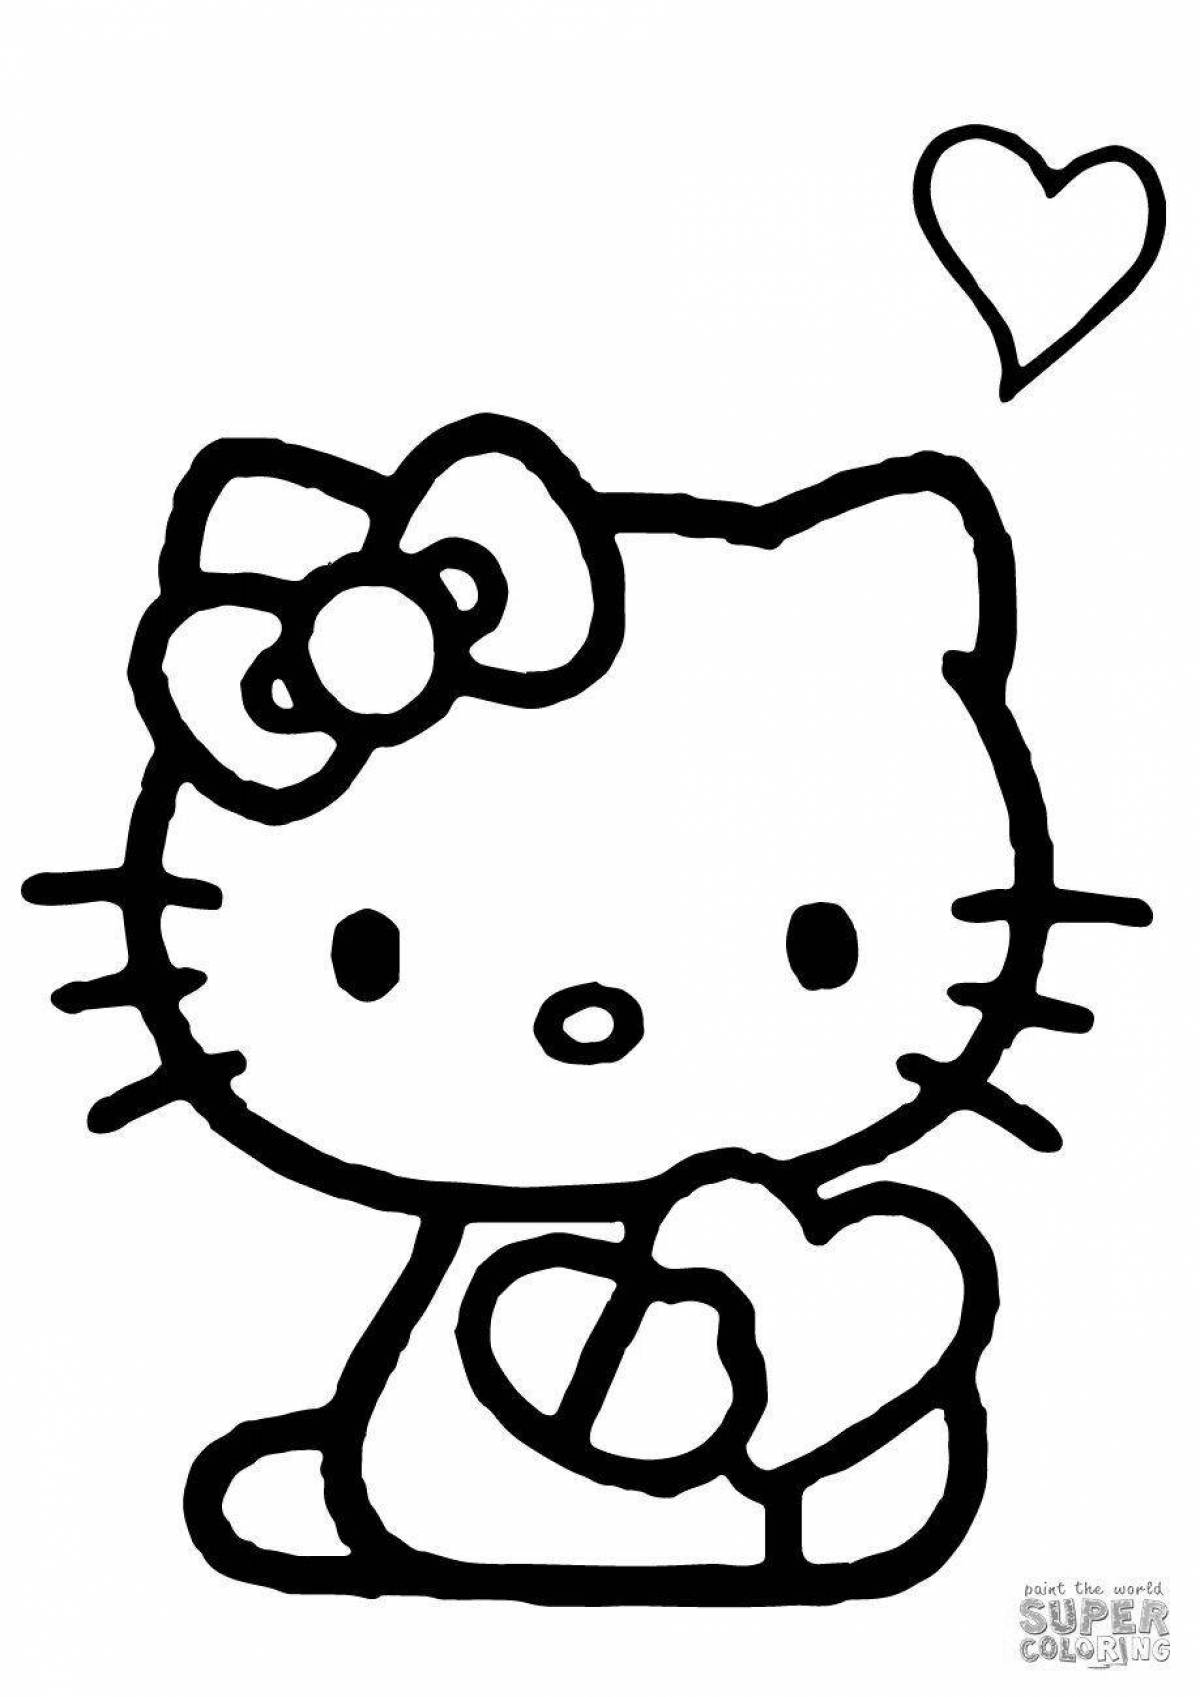 Coloring wild hello kitty with a heart